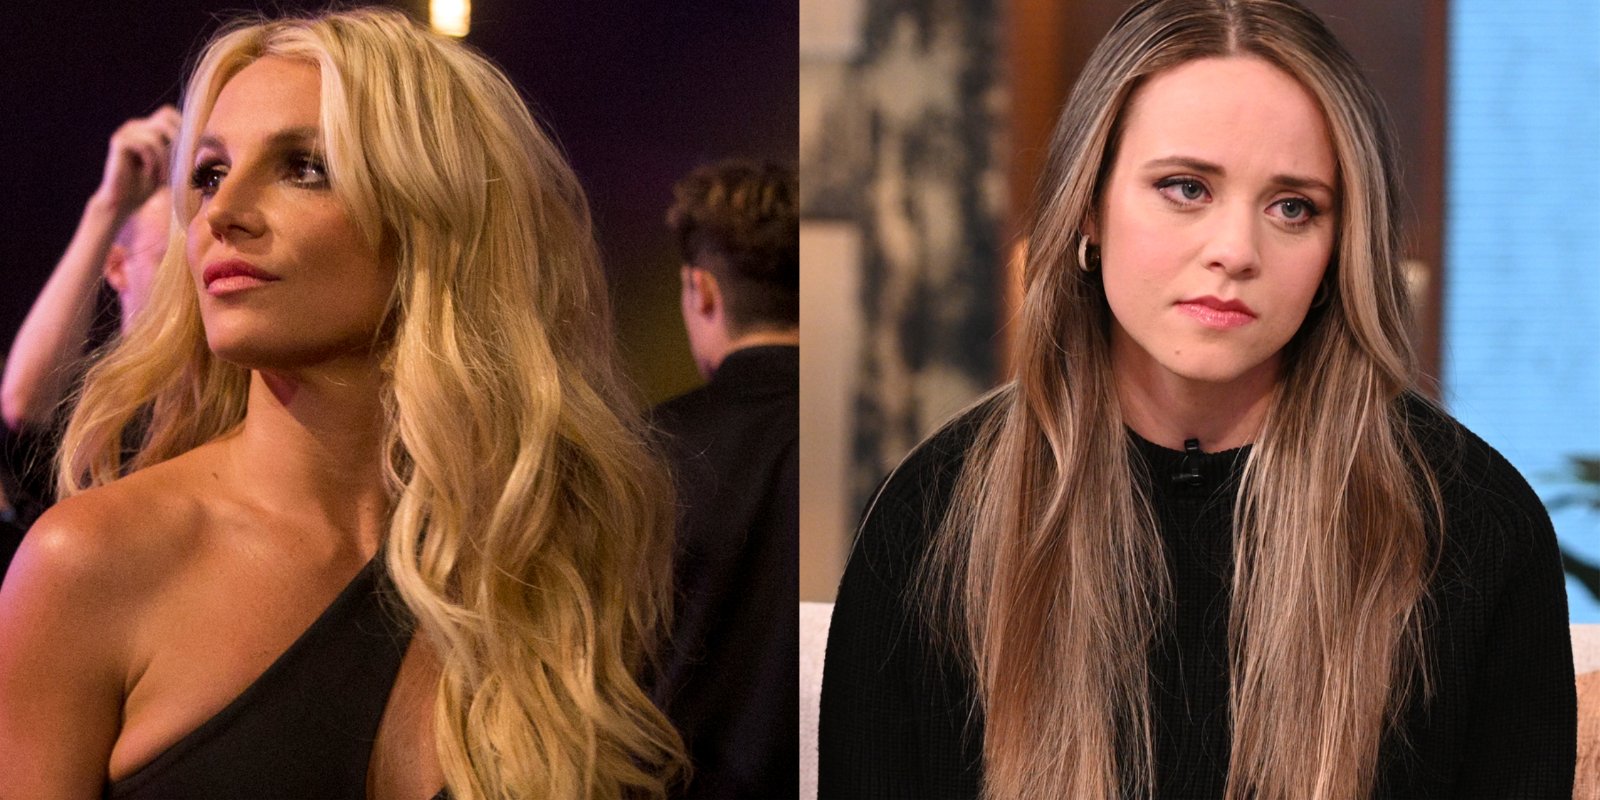 Britney Spears and Jinger Duggar in side by side photographs.